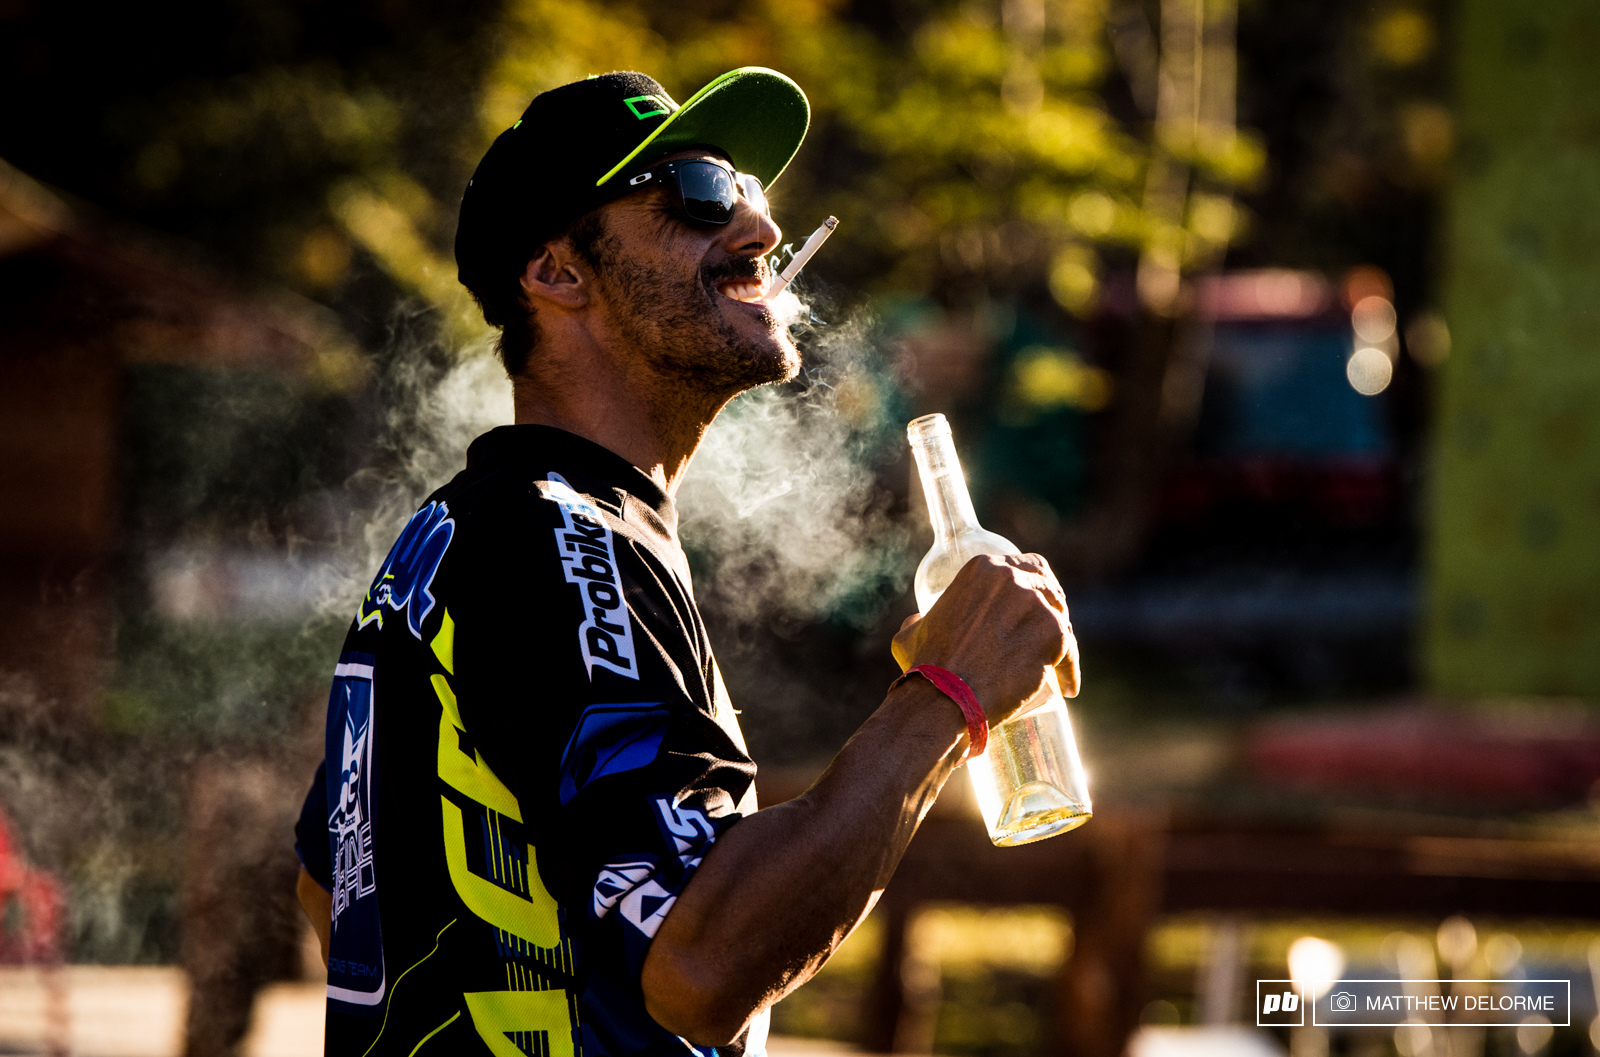 Celebrating the Gracia way. The wild man enjoying a couple of vices after long hard weekend on the bike. In his words, "F*ck it. This is Enduro."